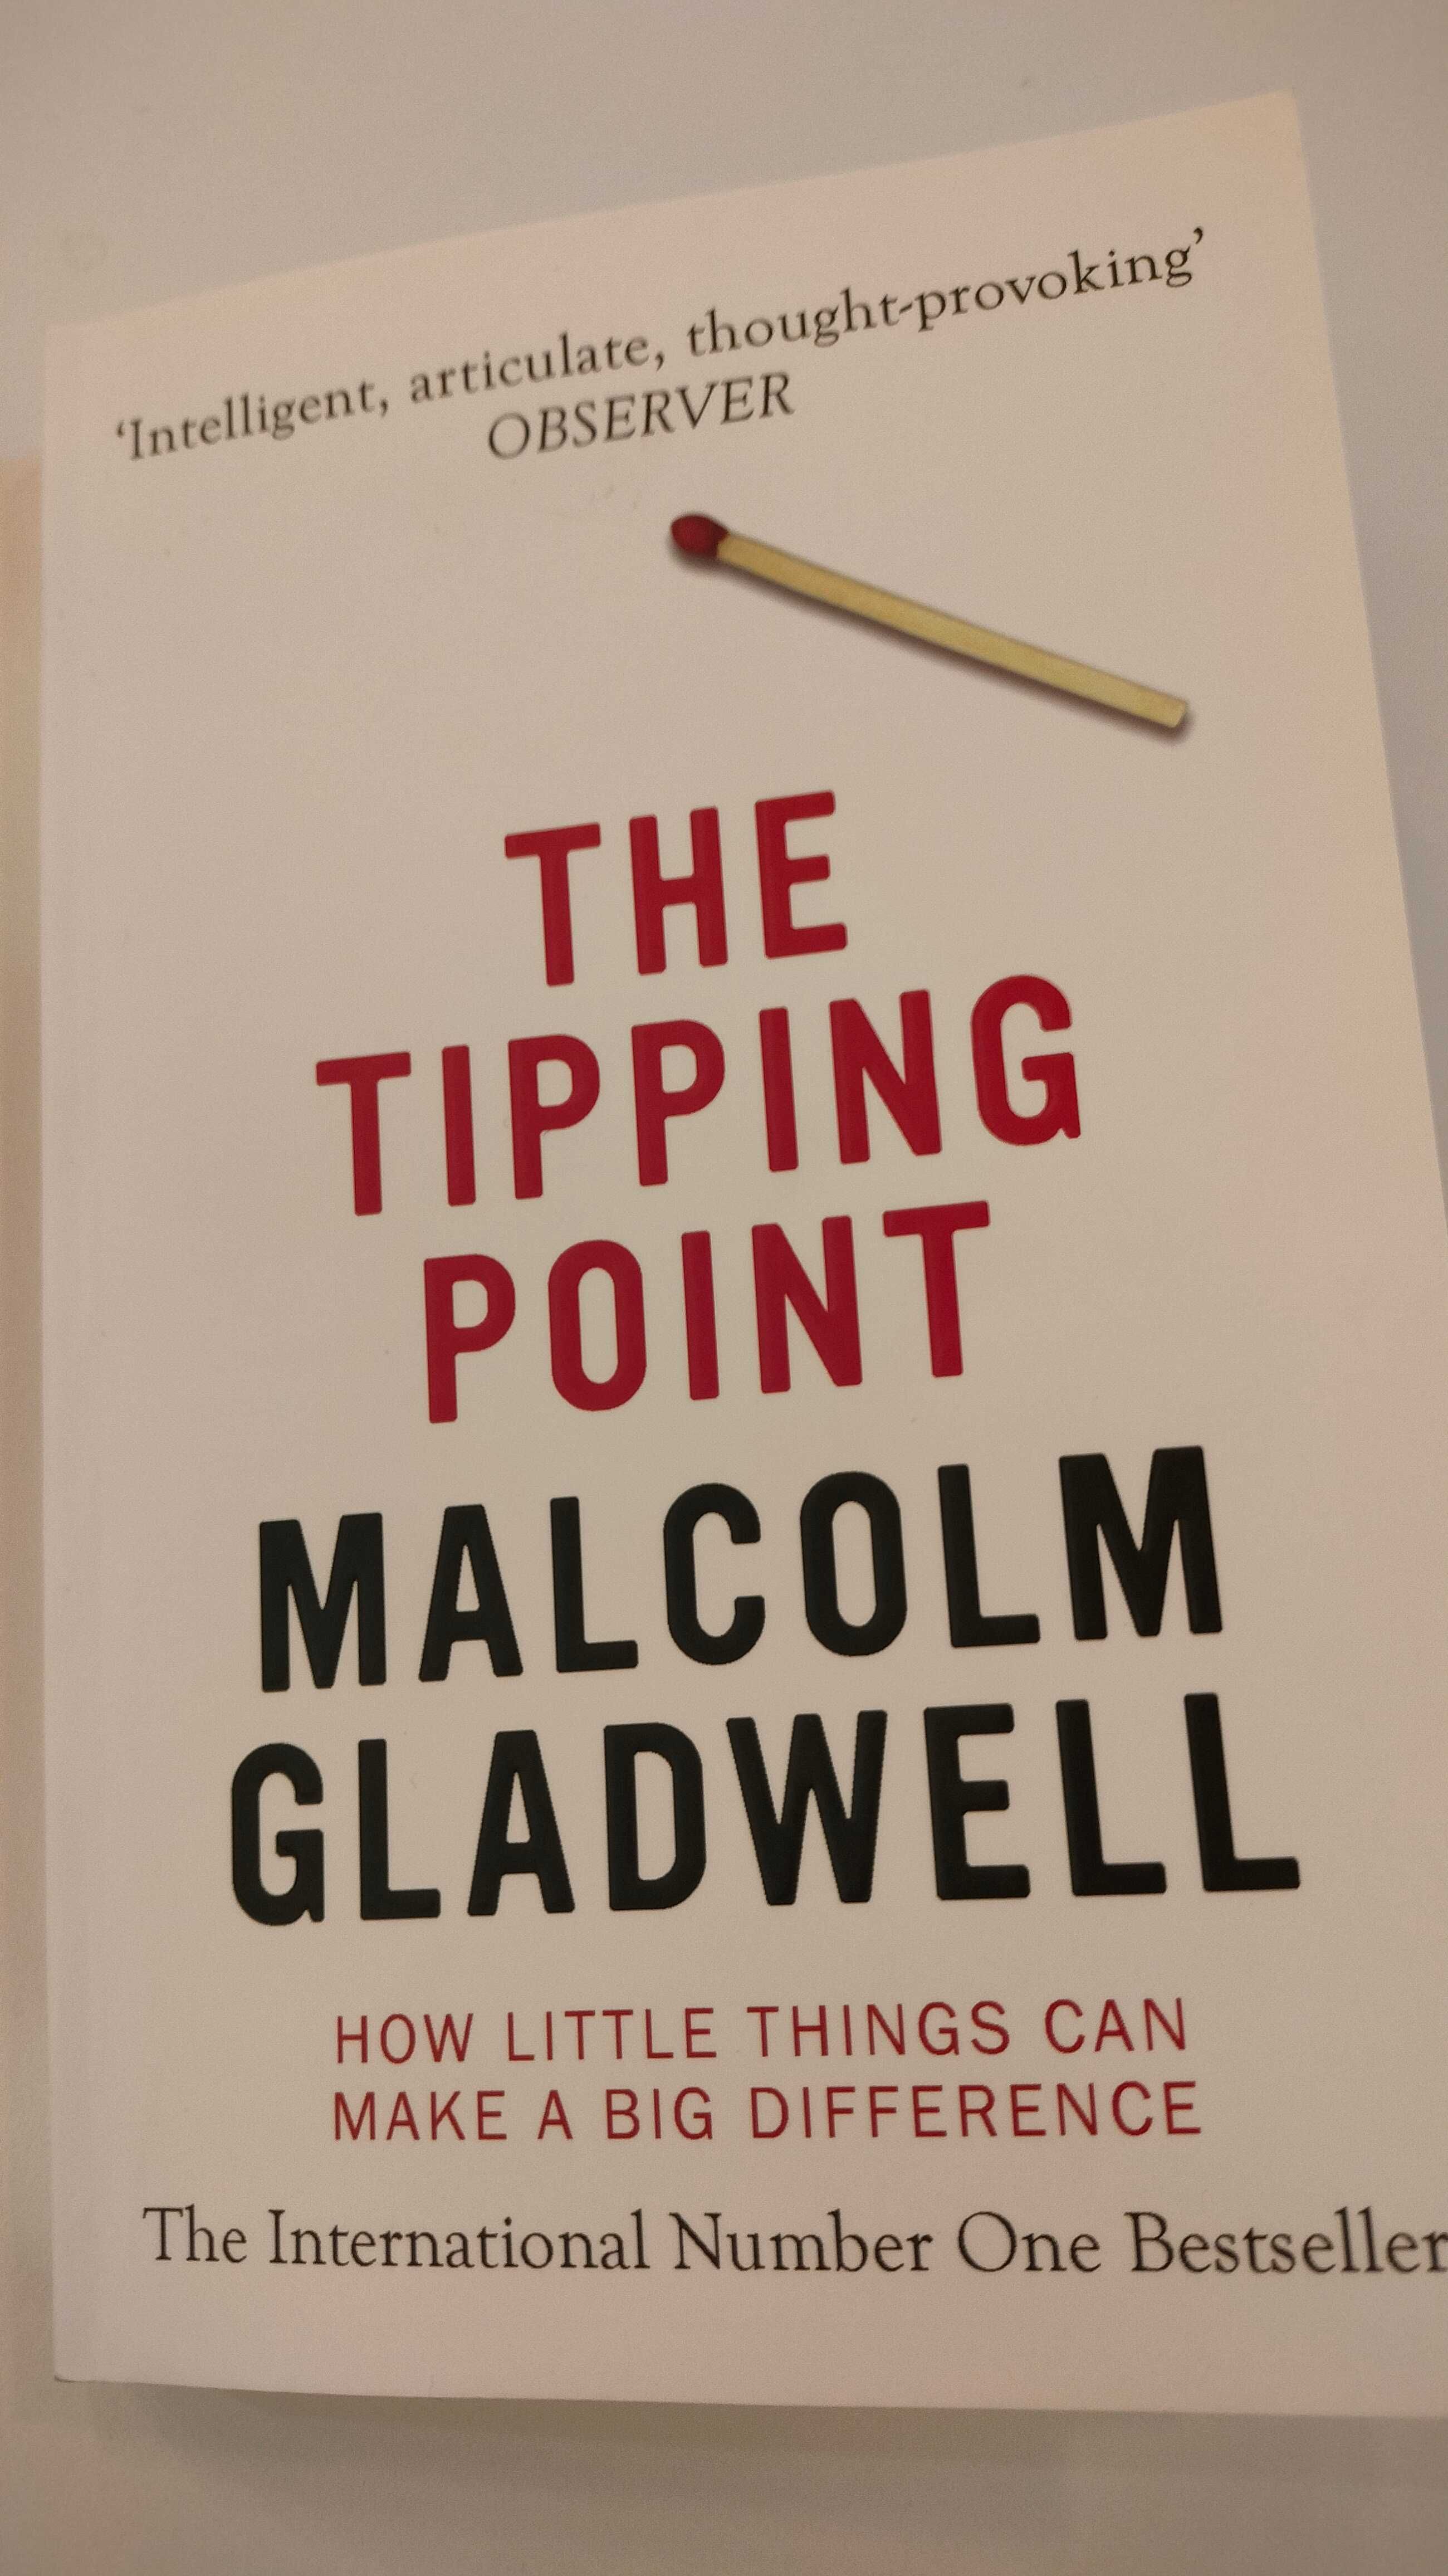 The tipping point, how little things can make a big difference